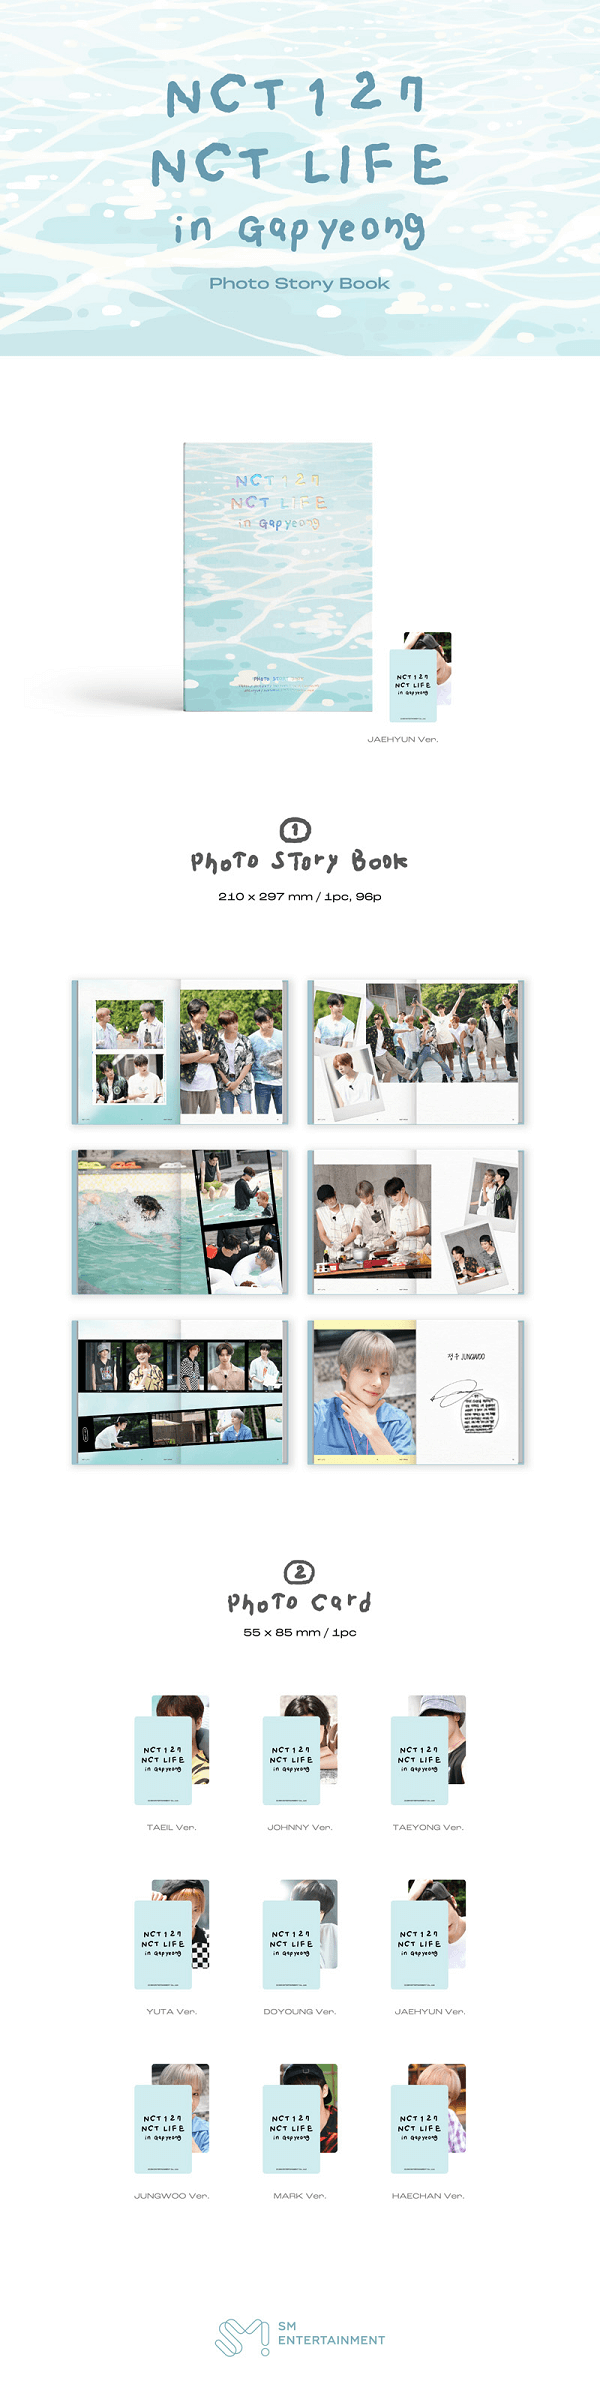 NCT 127 NCT LIFE IN GAPYEONG PHOTO STORY BOOK Infographic